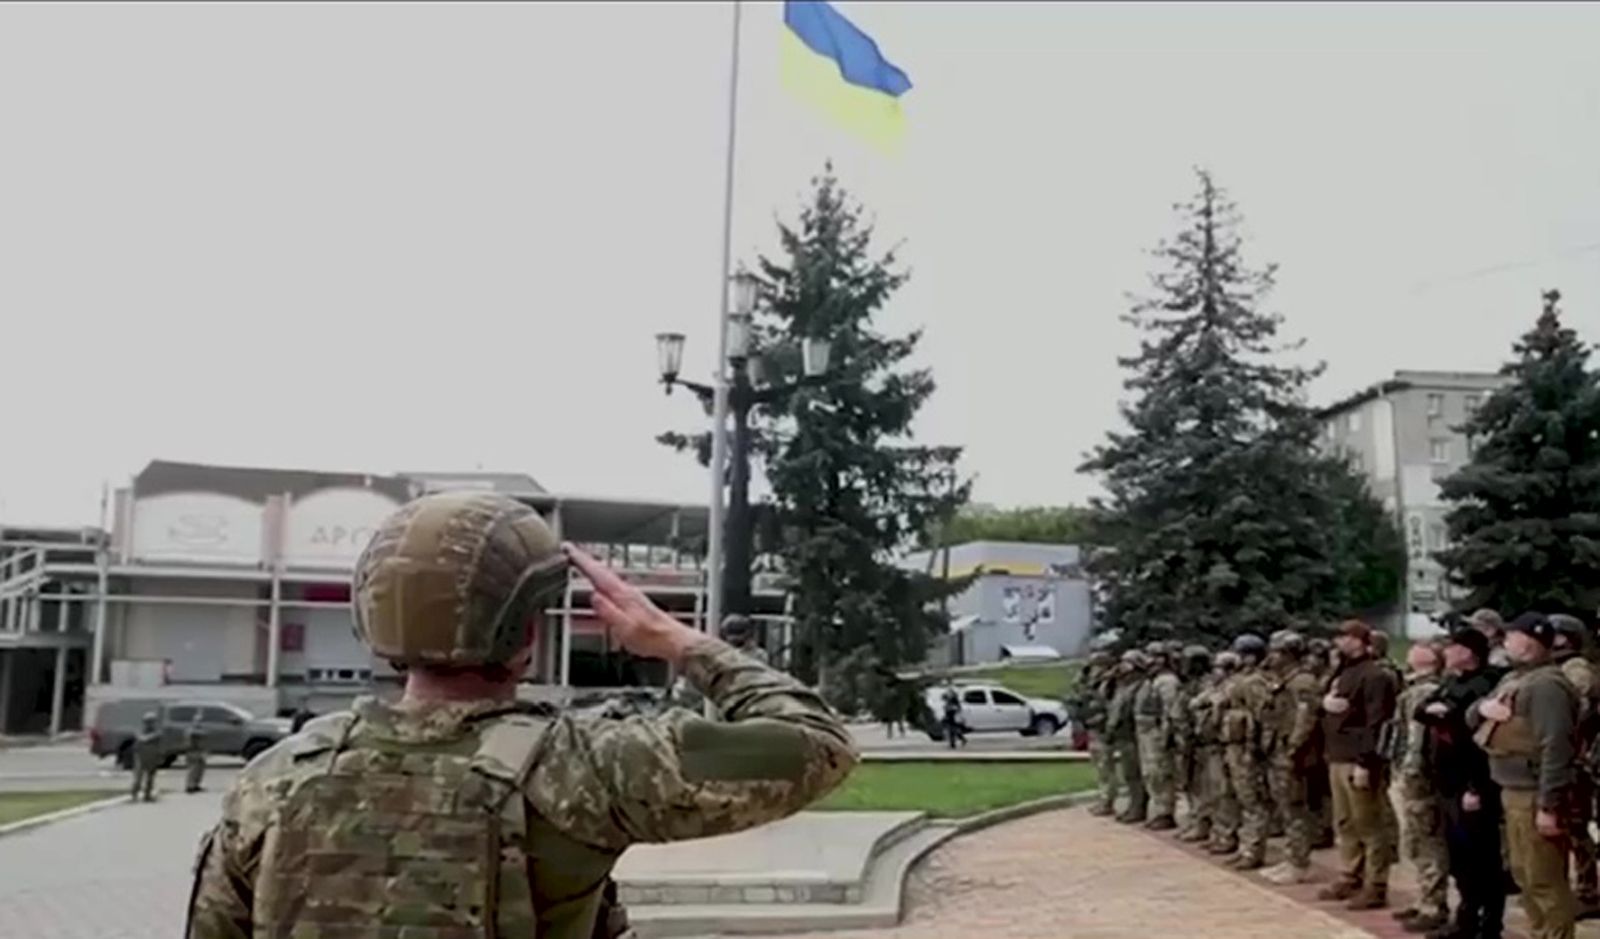 epa10175640 A framegrab taken from a handout video made available by the Ukrainian Defense Ministry shows Ukrainian flags flown in central Balakliya, Kharkiv oblast, Ukraine, 10 September 2022. The Ukrainian armed forces said they had recaptured about 2,500 square kilometres in the Kharkiv Oblast during a counter-offensive as of 09 September. Russian troops on 24 February invaded Ukrainian territory, starting a conflict that has provoked destruction and a humanitarian crisis.  EPA/UKRAINE DEFENSE MINISTRY / HANDOUT BEST QUALITY AVAILABLE HANDOUT EDITORIAL USE ONLY/NO SALES